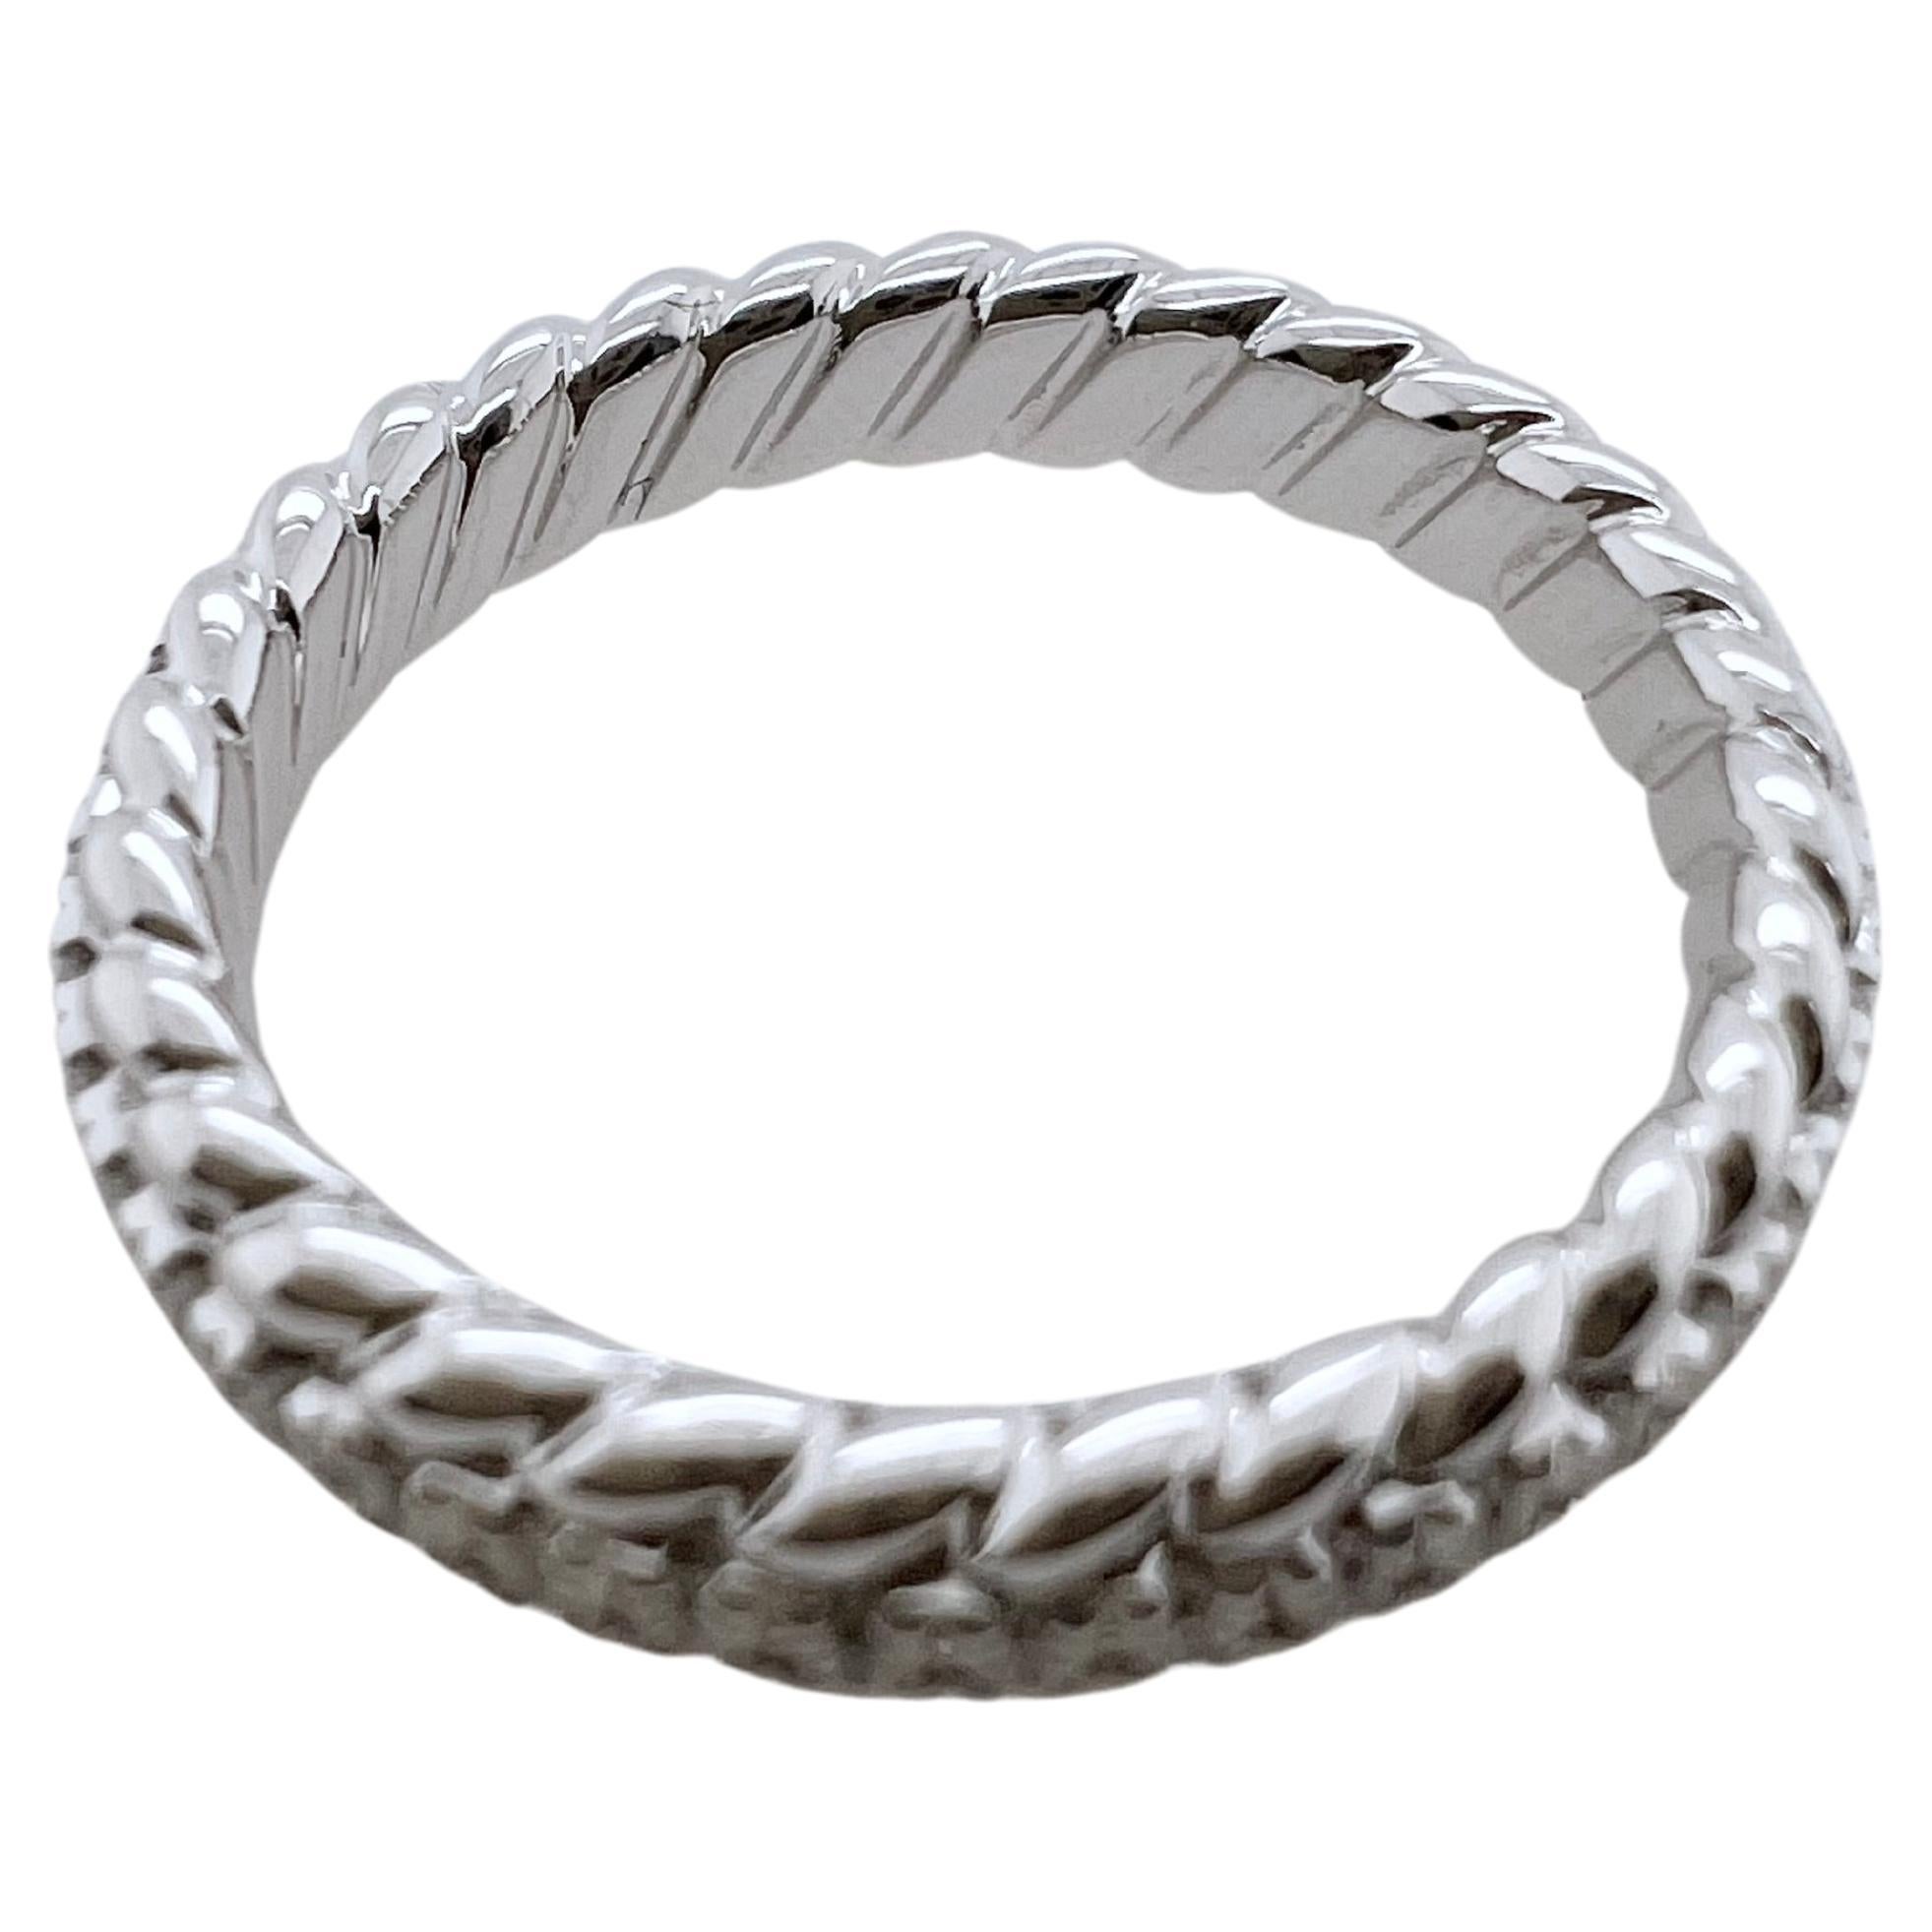 This amazing band will be your go to favorites.  This individual band is made in 18k white gold with round brilliant diamonds prong set.  The outer edges have a unique rope style trim that give texture and character.  The solid gold is made sturdy